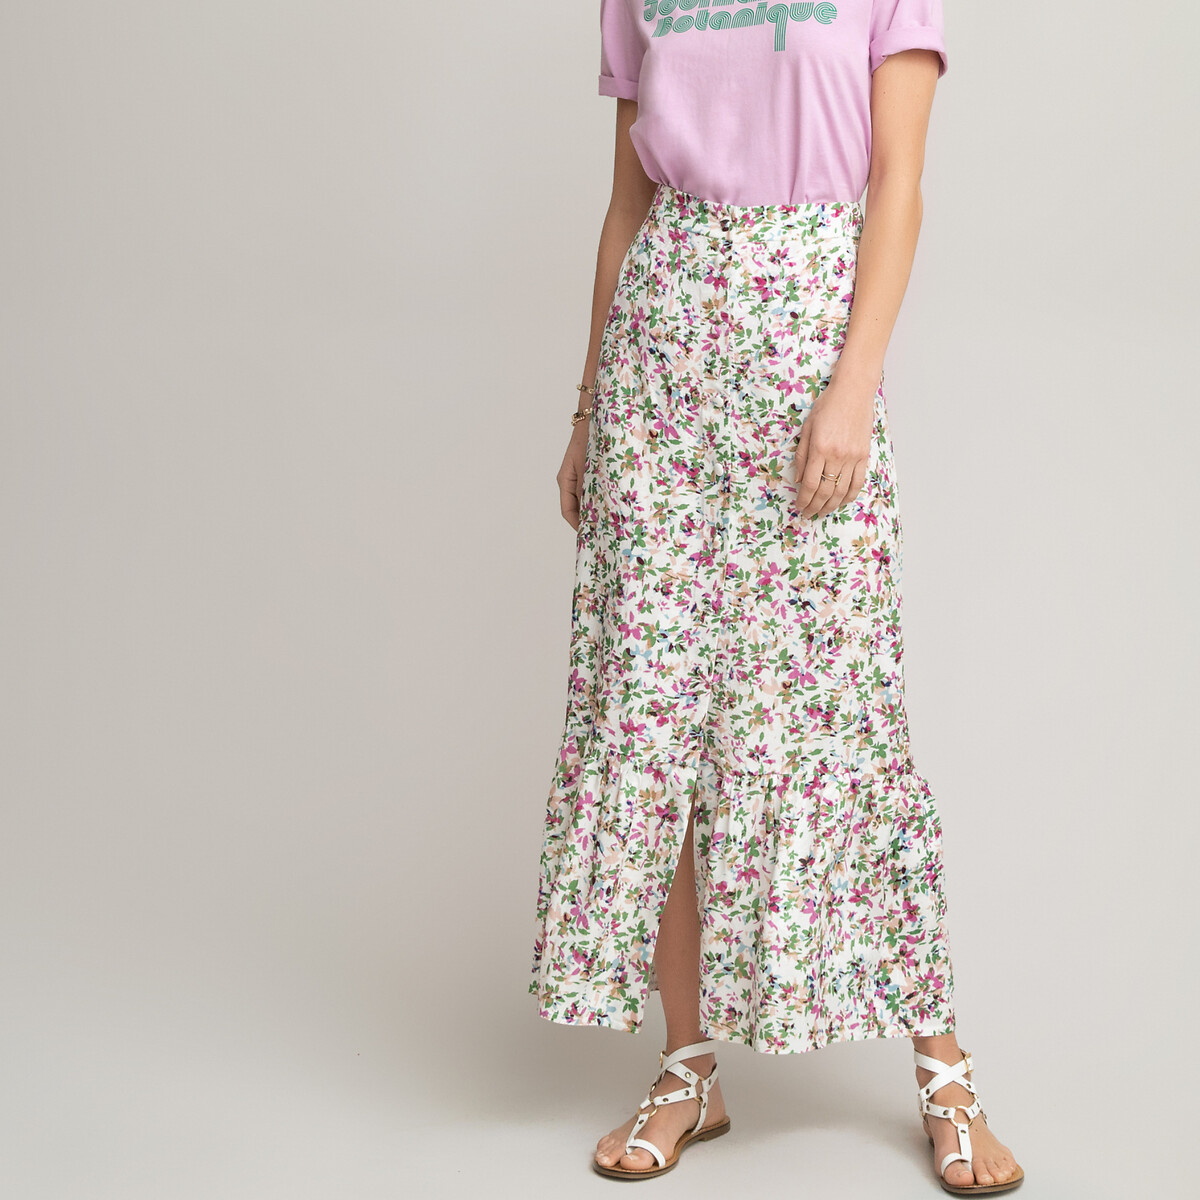 Buttoned ruffle maxi skirt in floral ...